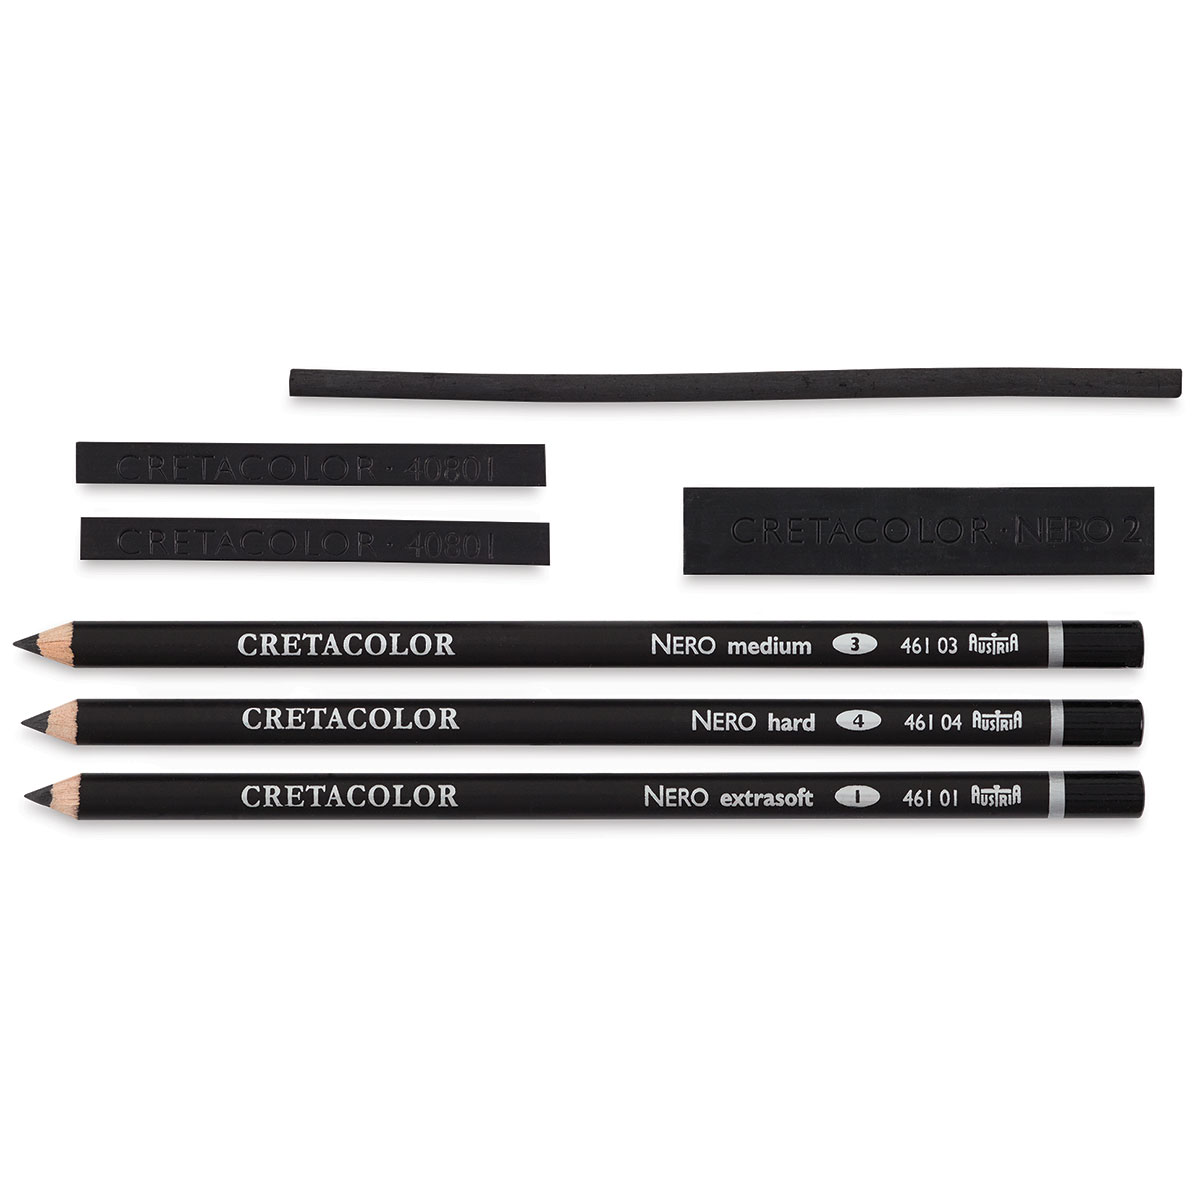 Dlicoda 24 Pcs Compressed Charcoal Sticks with Soft, Medium, Hard and White  Charcoal - Premium Drawing Charcoal Kit for Drawing, Sketching and Shading